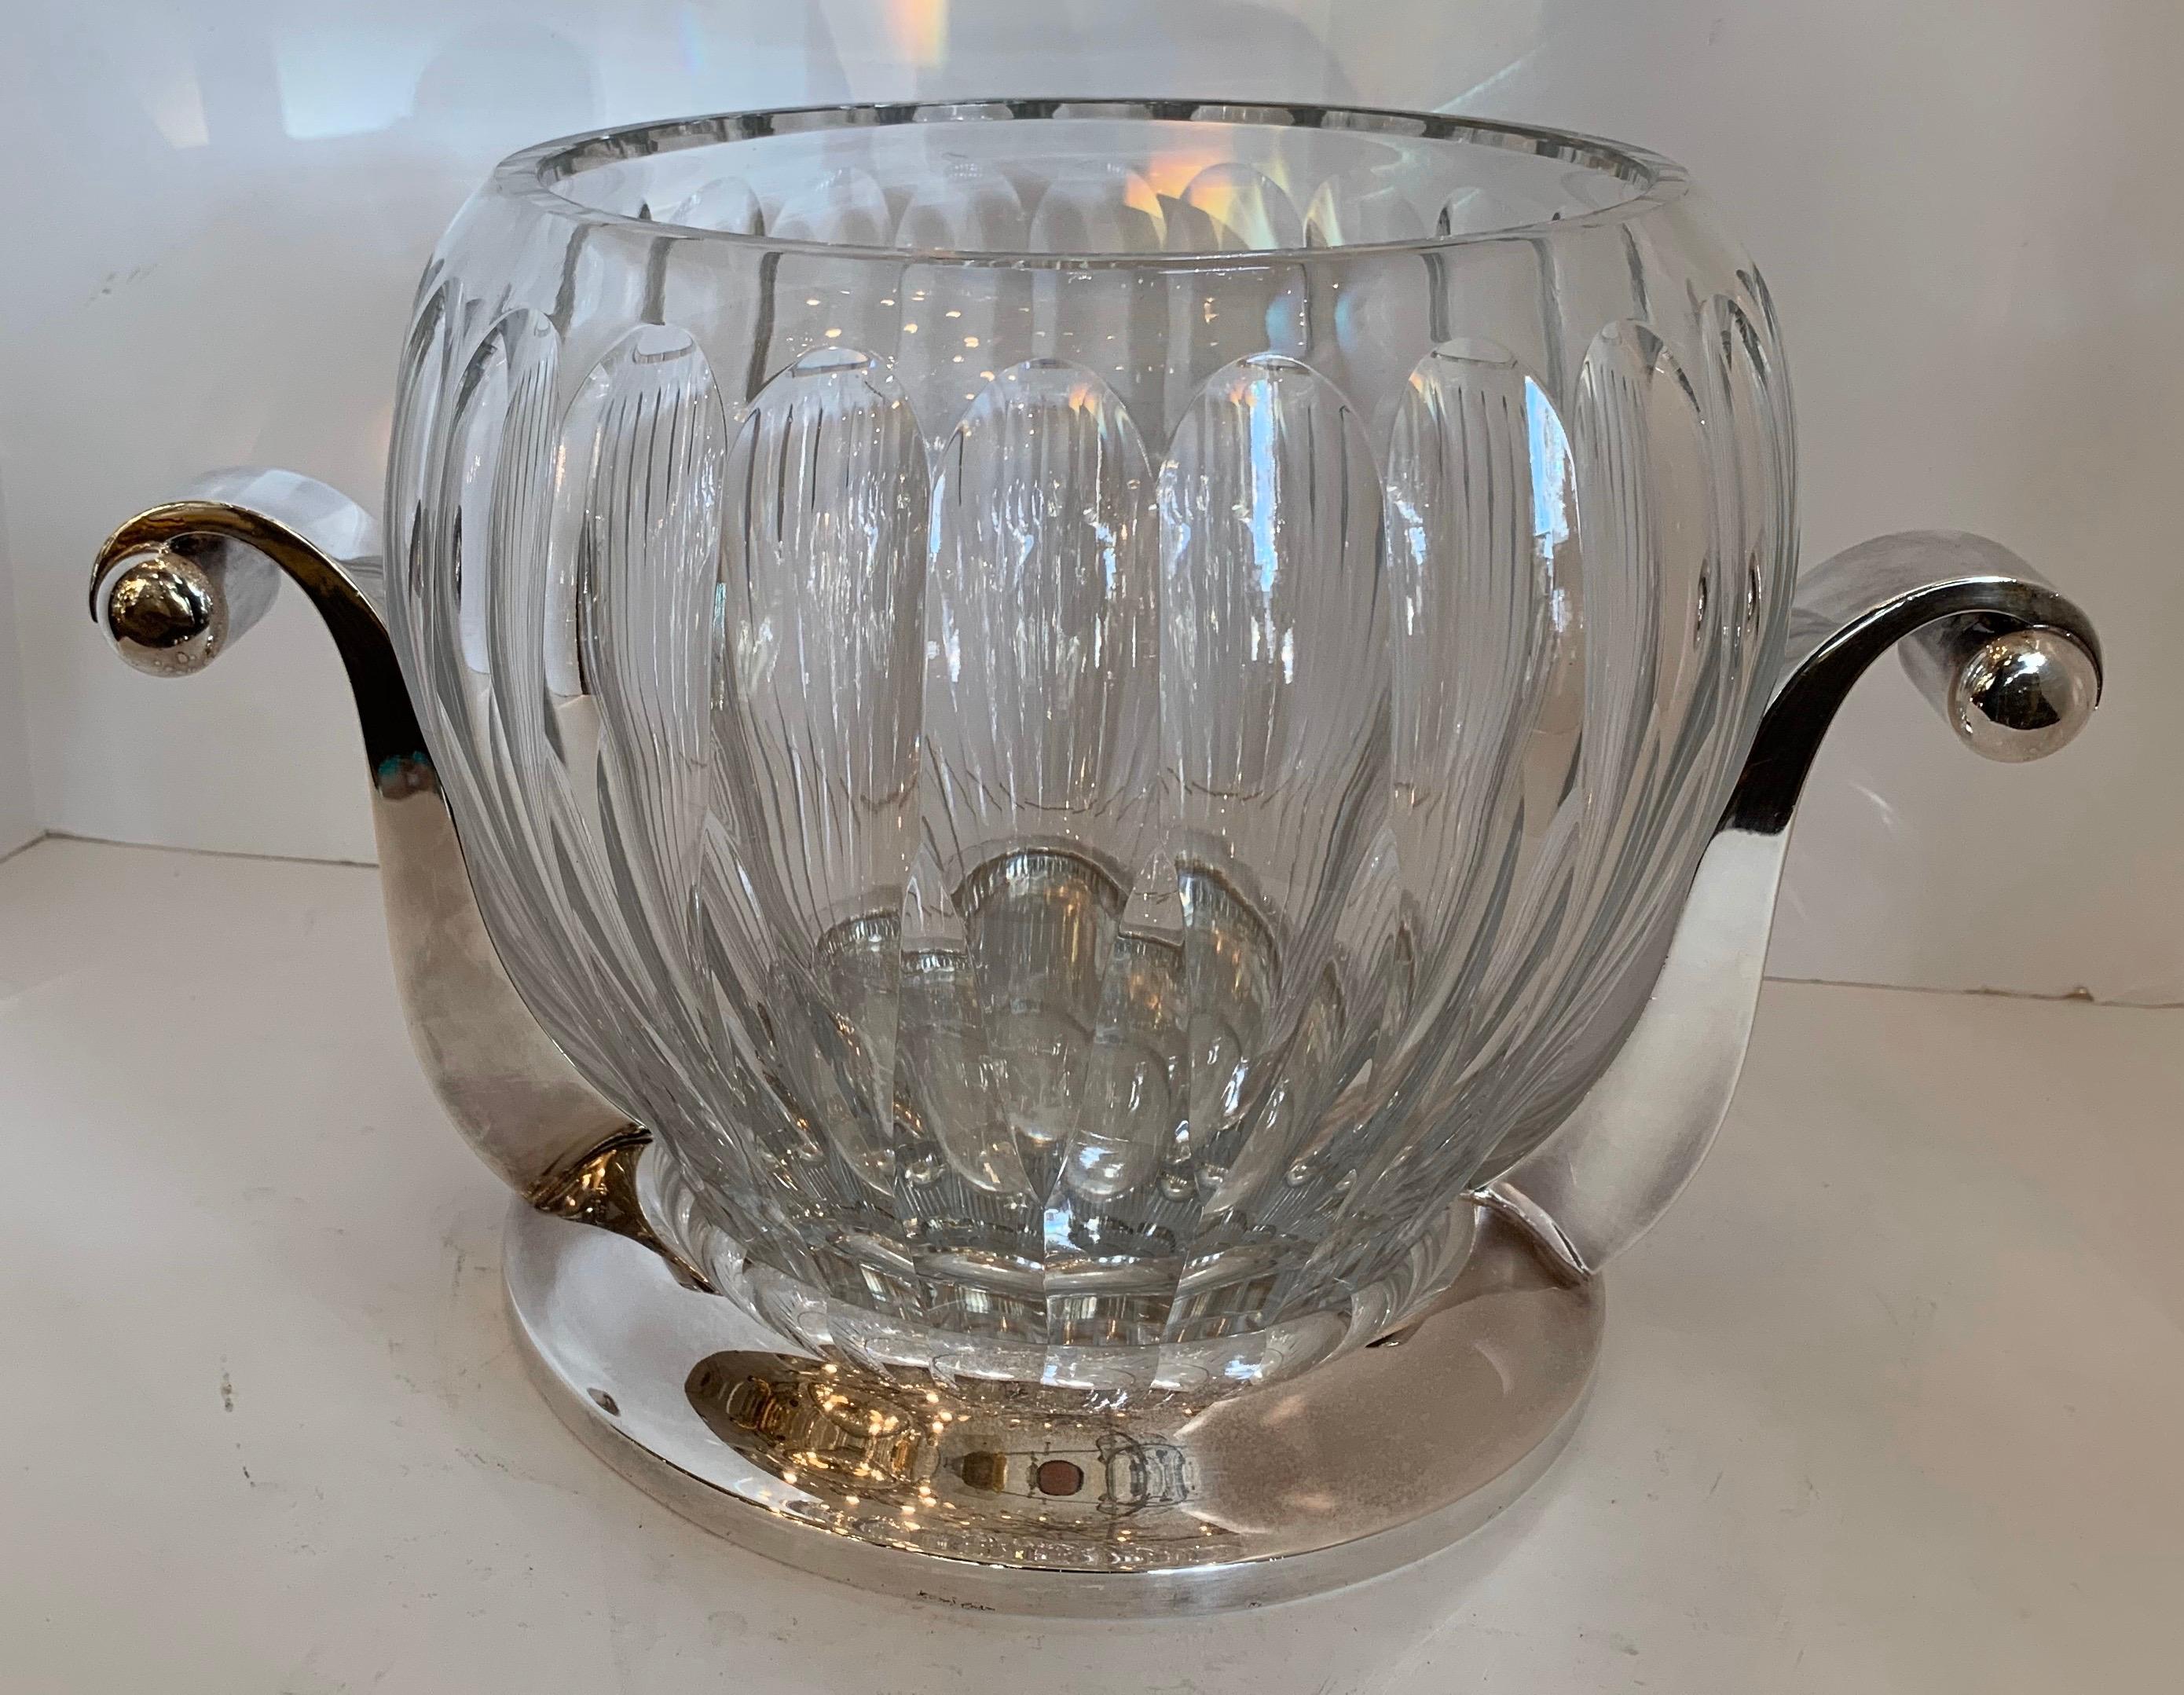 A wonderful Mid-Century Modern German Art Deco crystal & silver plated centerpiece / tureen with replacement ladle.